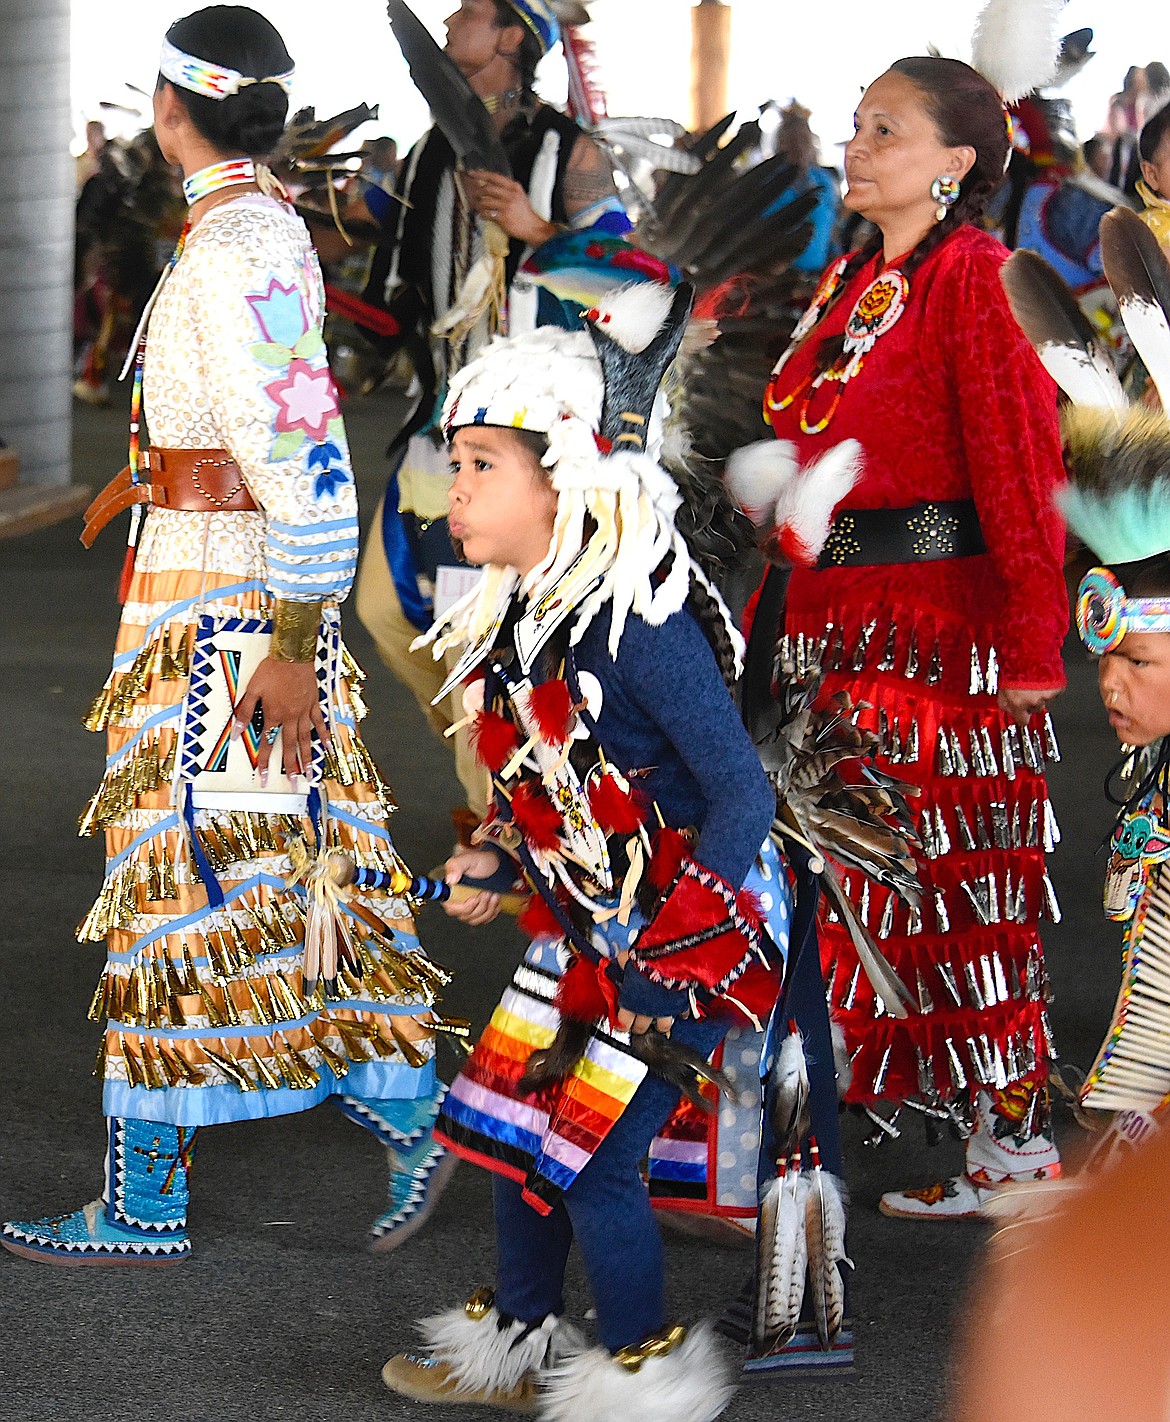 With $50,000 in prize money for dance contests, the dance floor was full at the Standing Arrow Powwow, including young dancers. (Berl Tiskus/Leader)